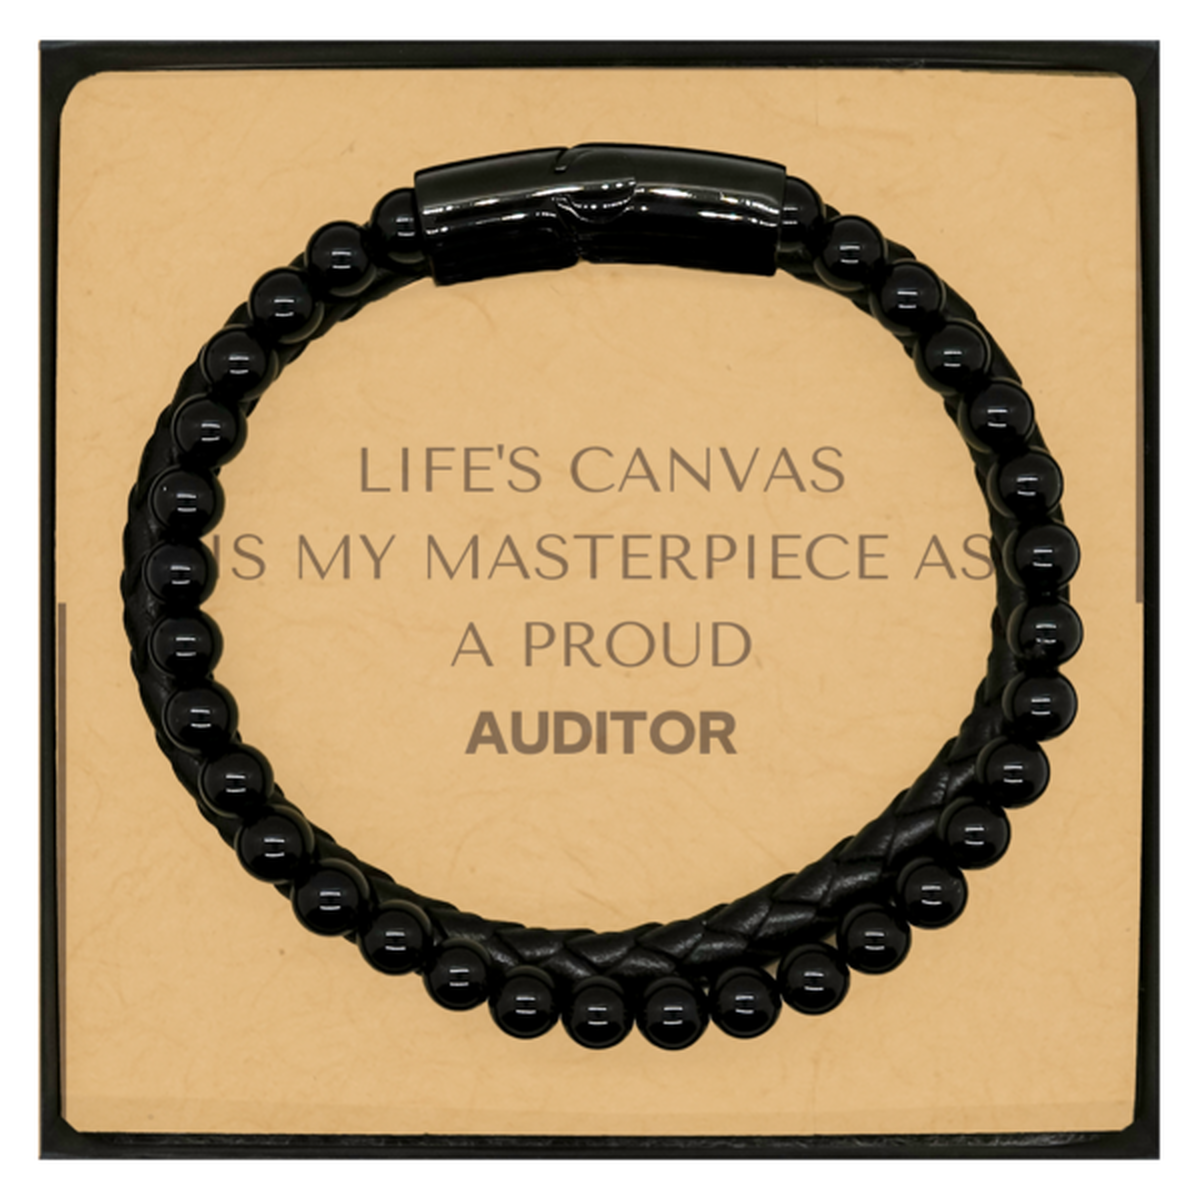 Proud Auditor Gifts, Life's canvas is my masterpiece, Epic Birthday Christmas Unique Stone Leather Bracelets For Auditor, Coworkers, Men, Women, Friends